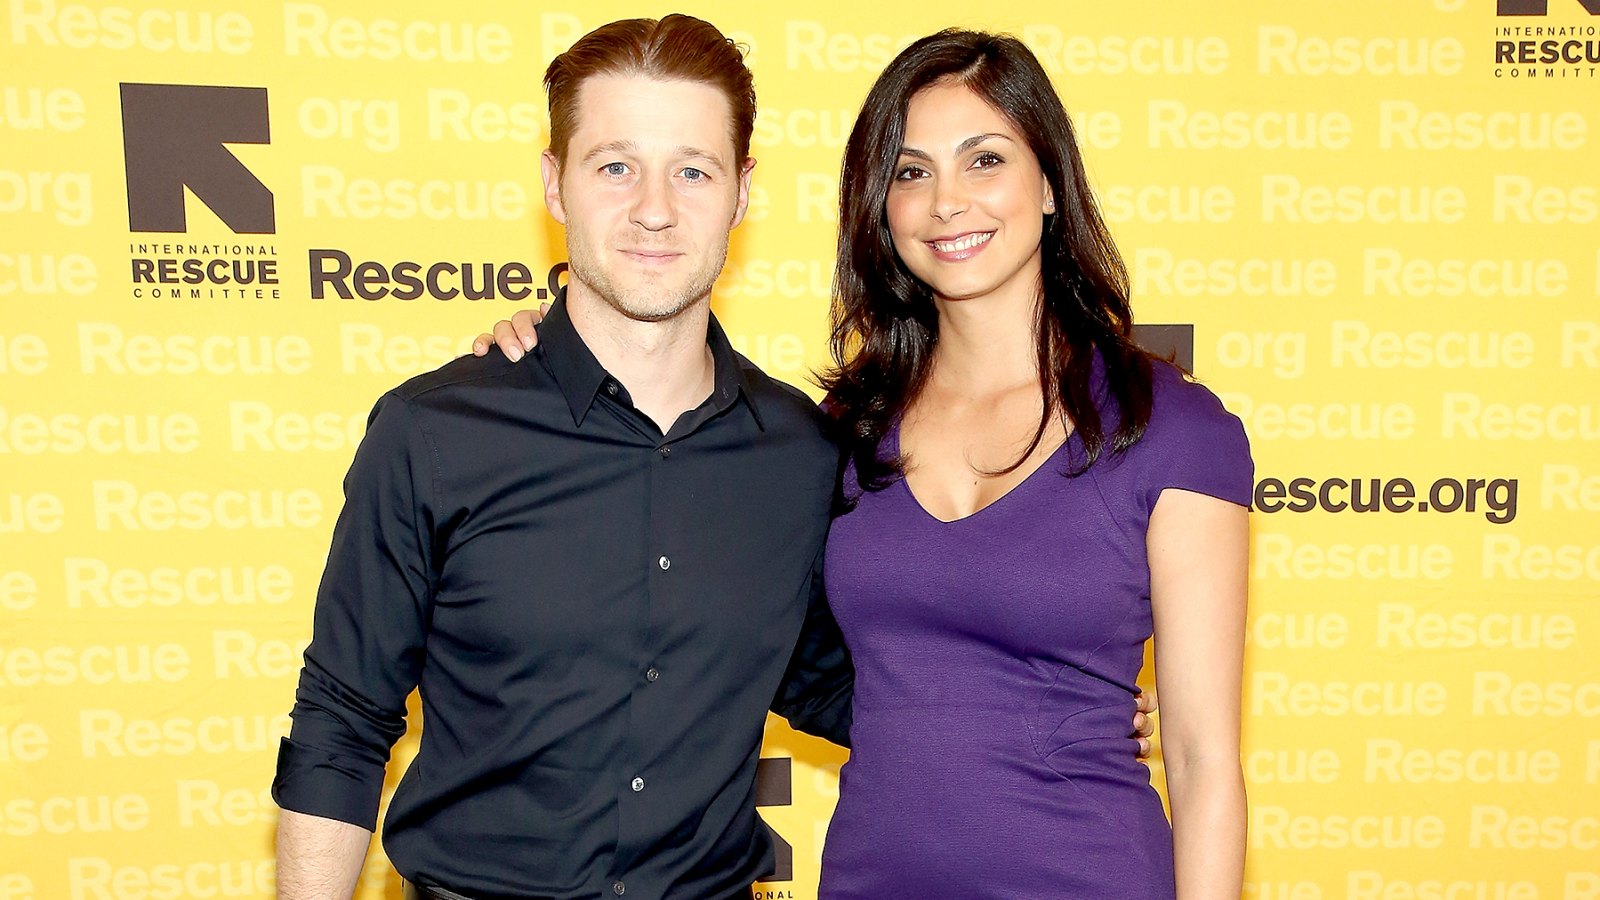 Ben McKenzie and Morena Baccarin attend the 6th Annual GenR Summer Party Hosted By International Rescue Committee at Tribeca Rooftop on July 19, 2016 in New York City.